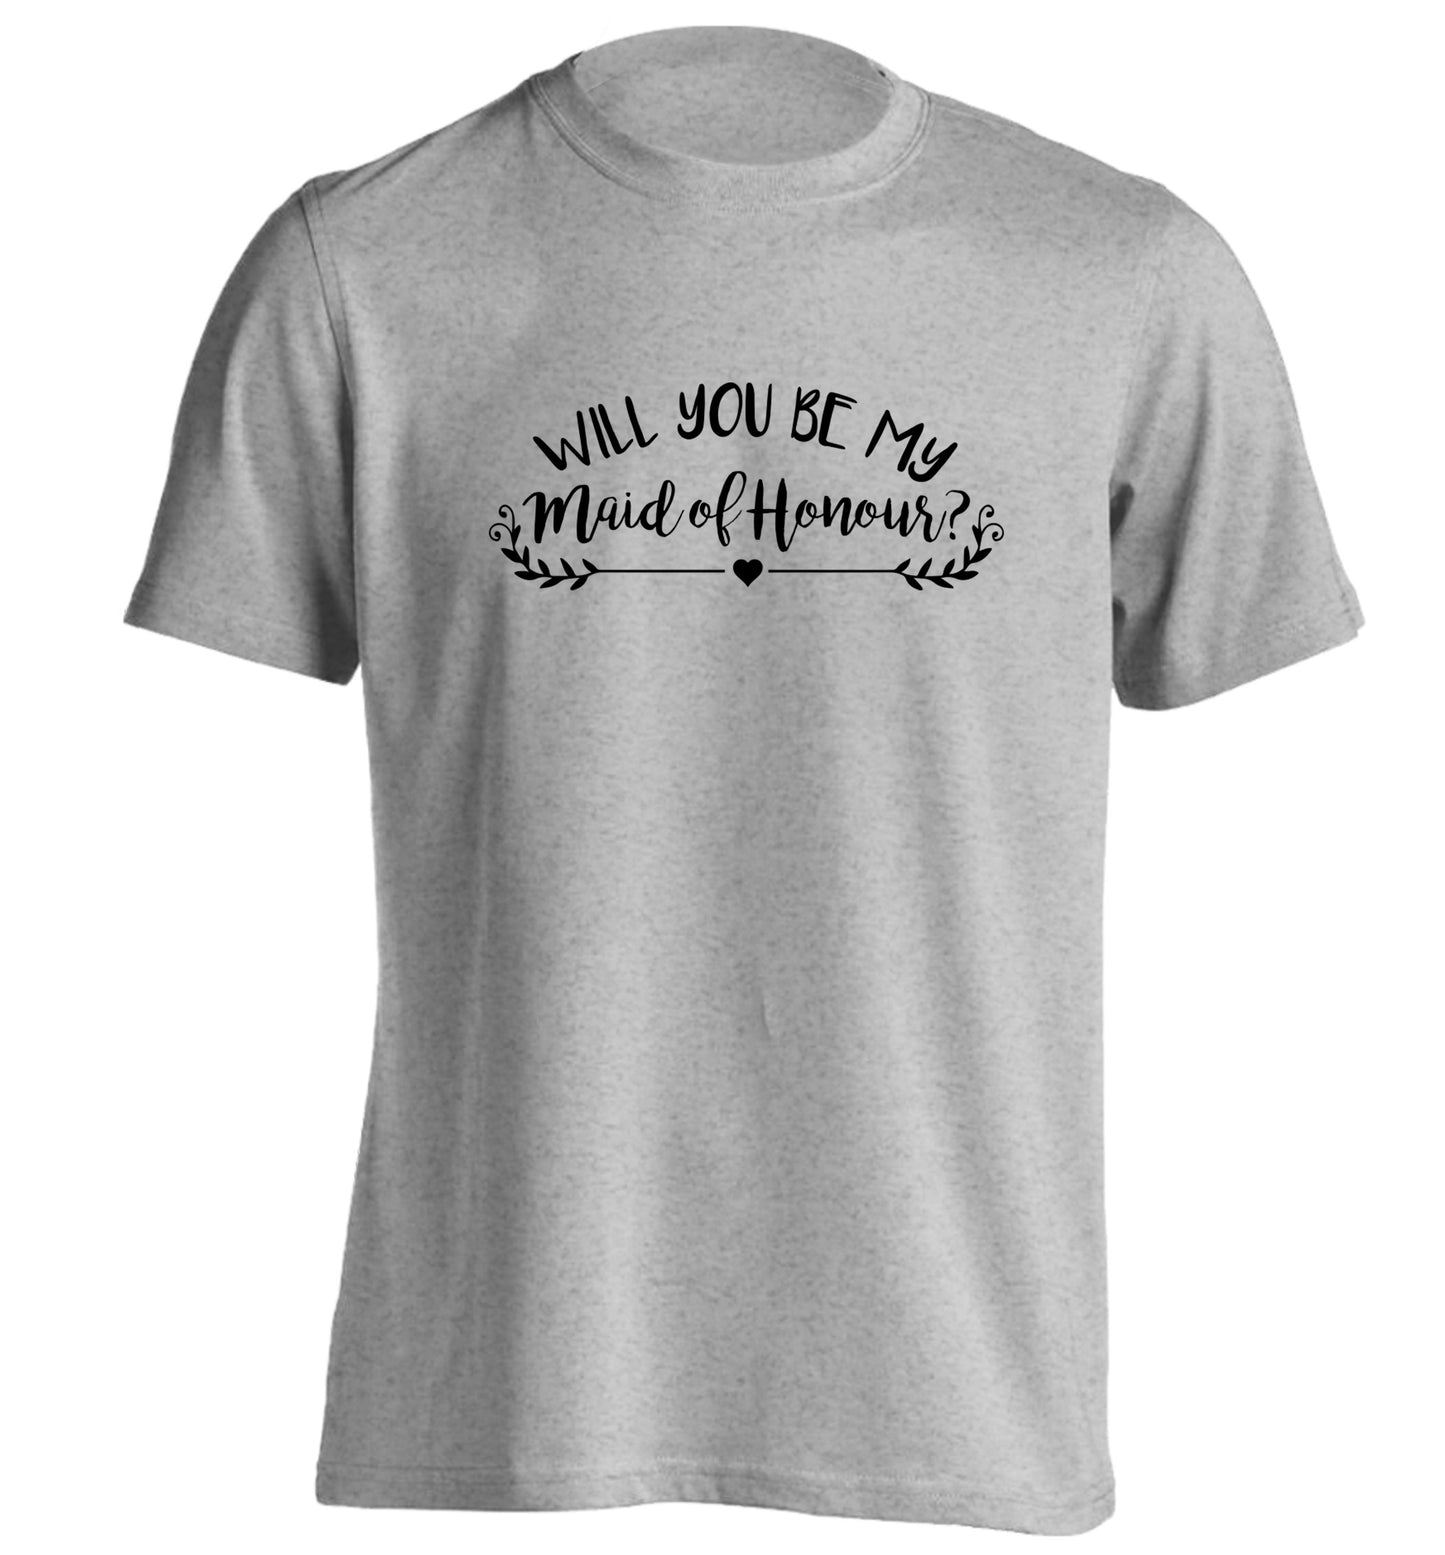 Will you be my maid of honour? adults unisex grey Tshirt 2XL